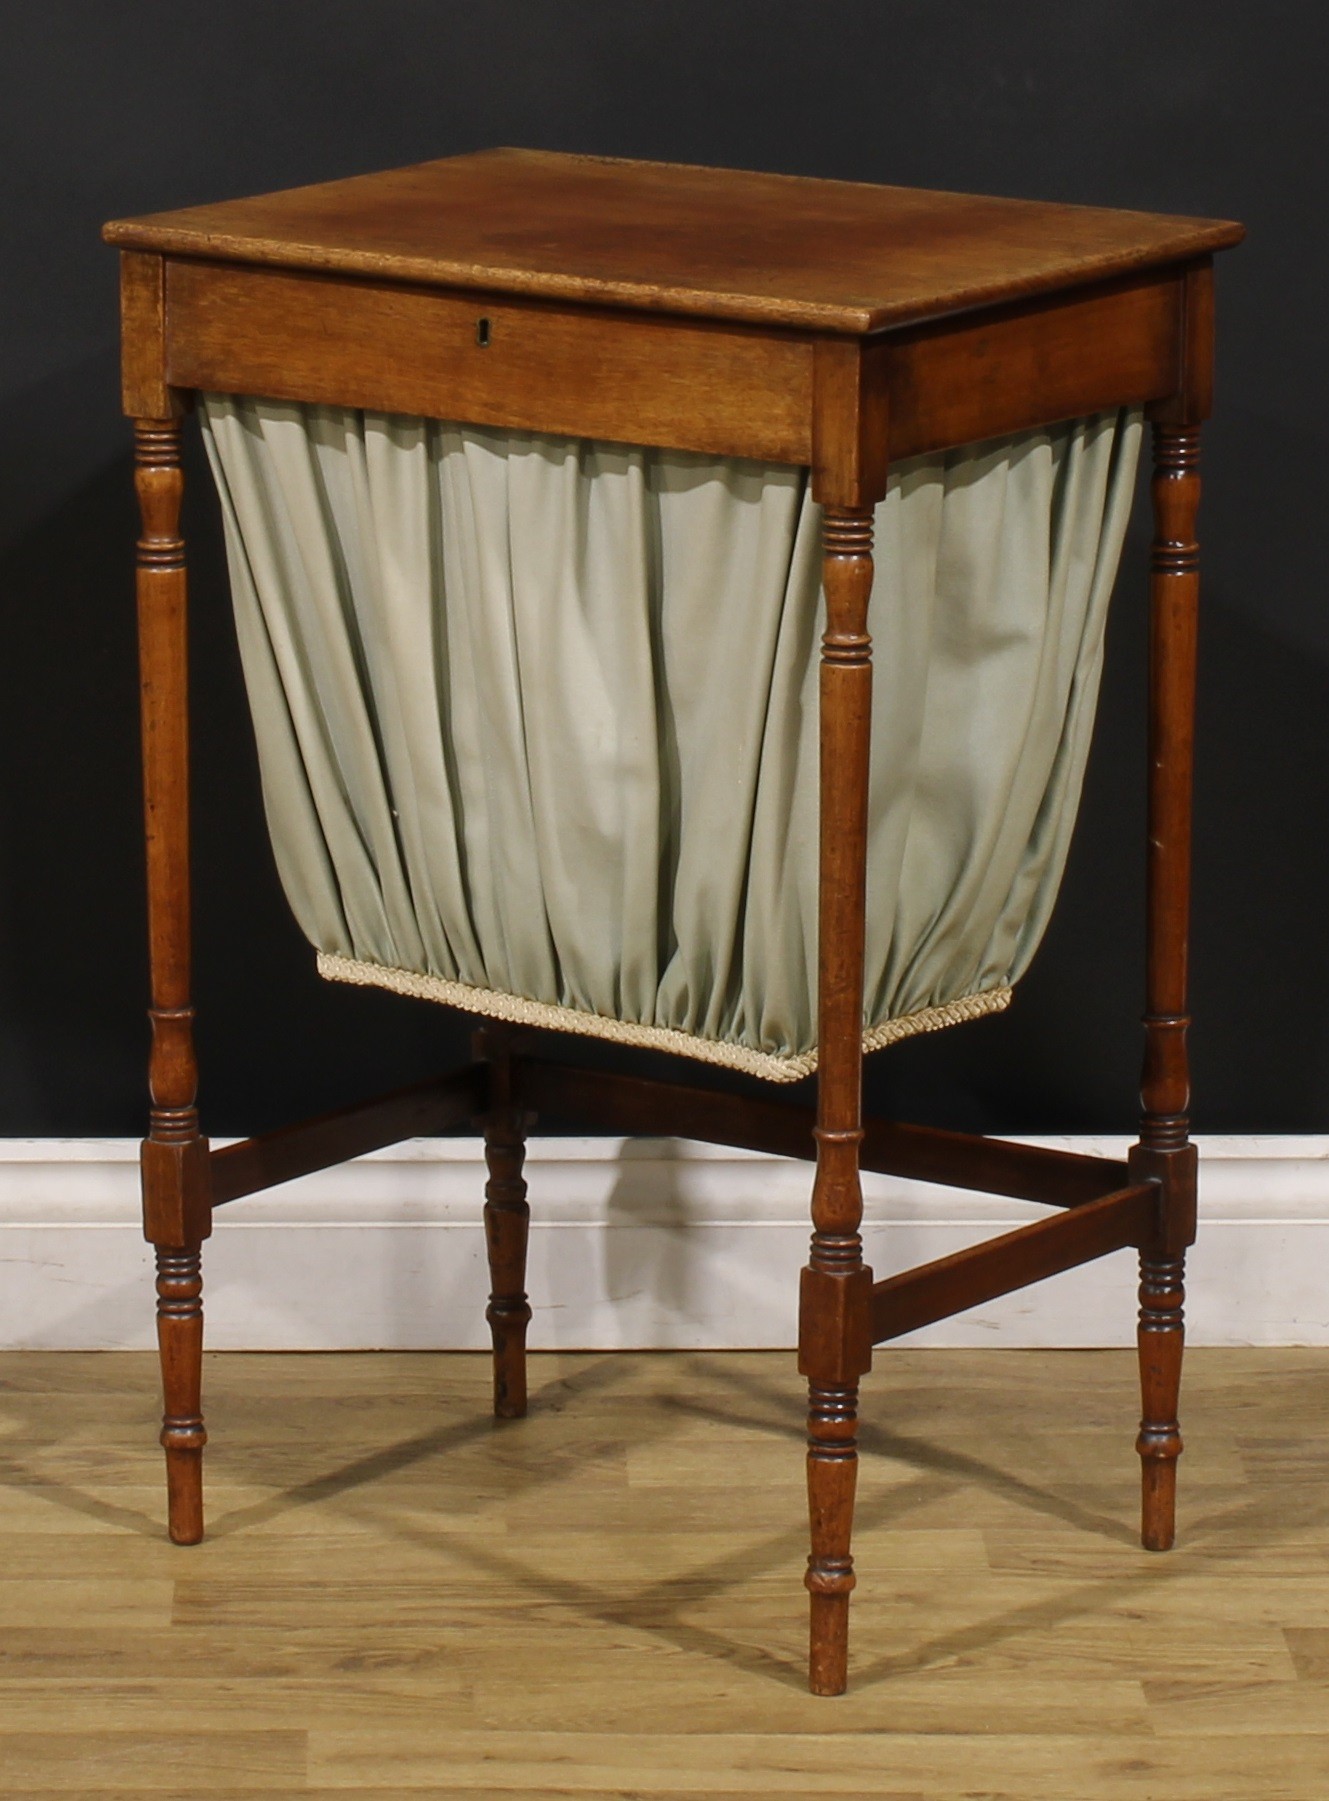 A George IV mahogany work table, hinged top, turned legs, 70cm high, 47.5cm wide, 34.5cm deep, c. - Image 5 of 6